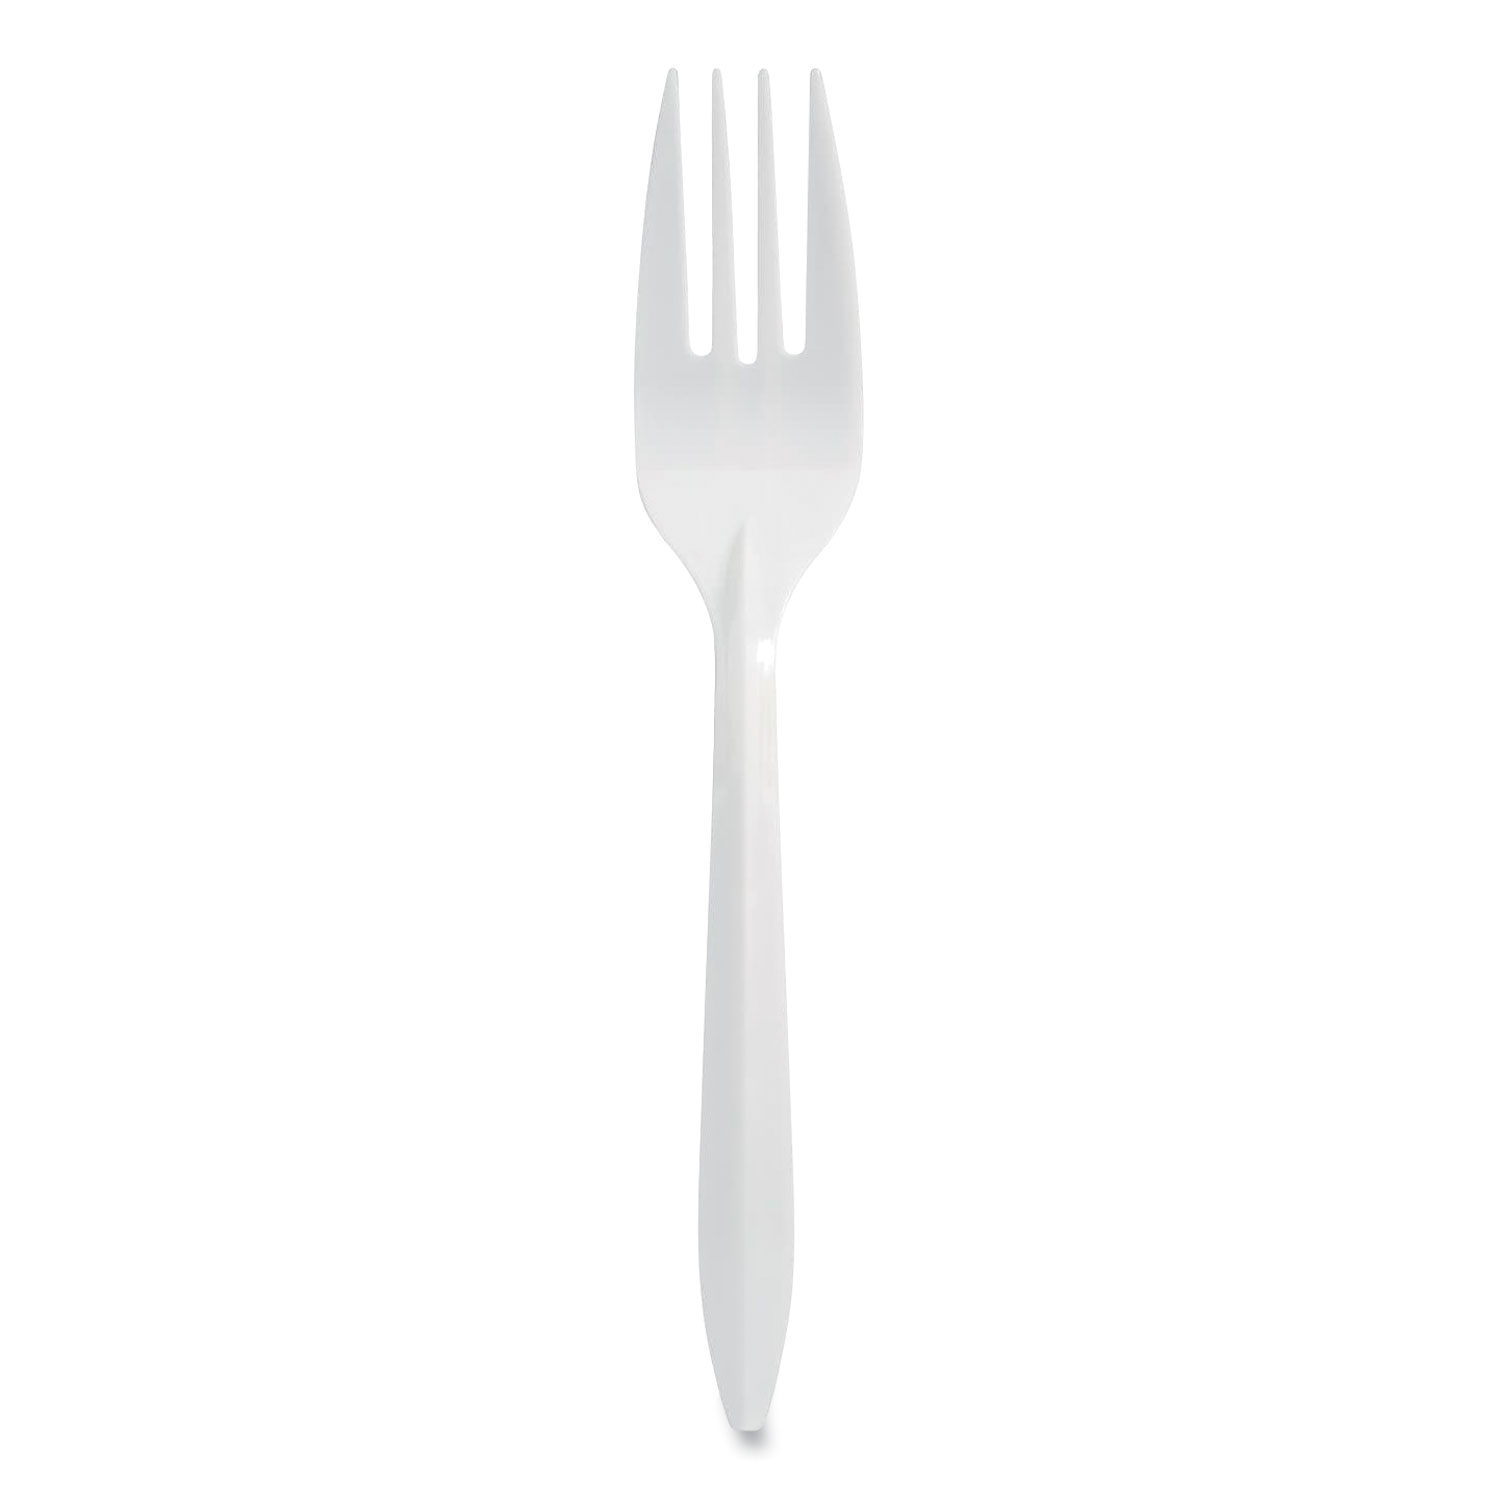 Berkley Square Individually Wrapped Mediumweight Cutlery, Forks, White, 1,000/Carton